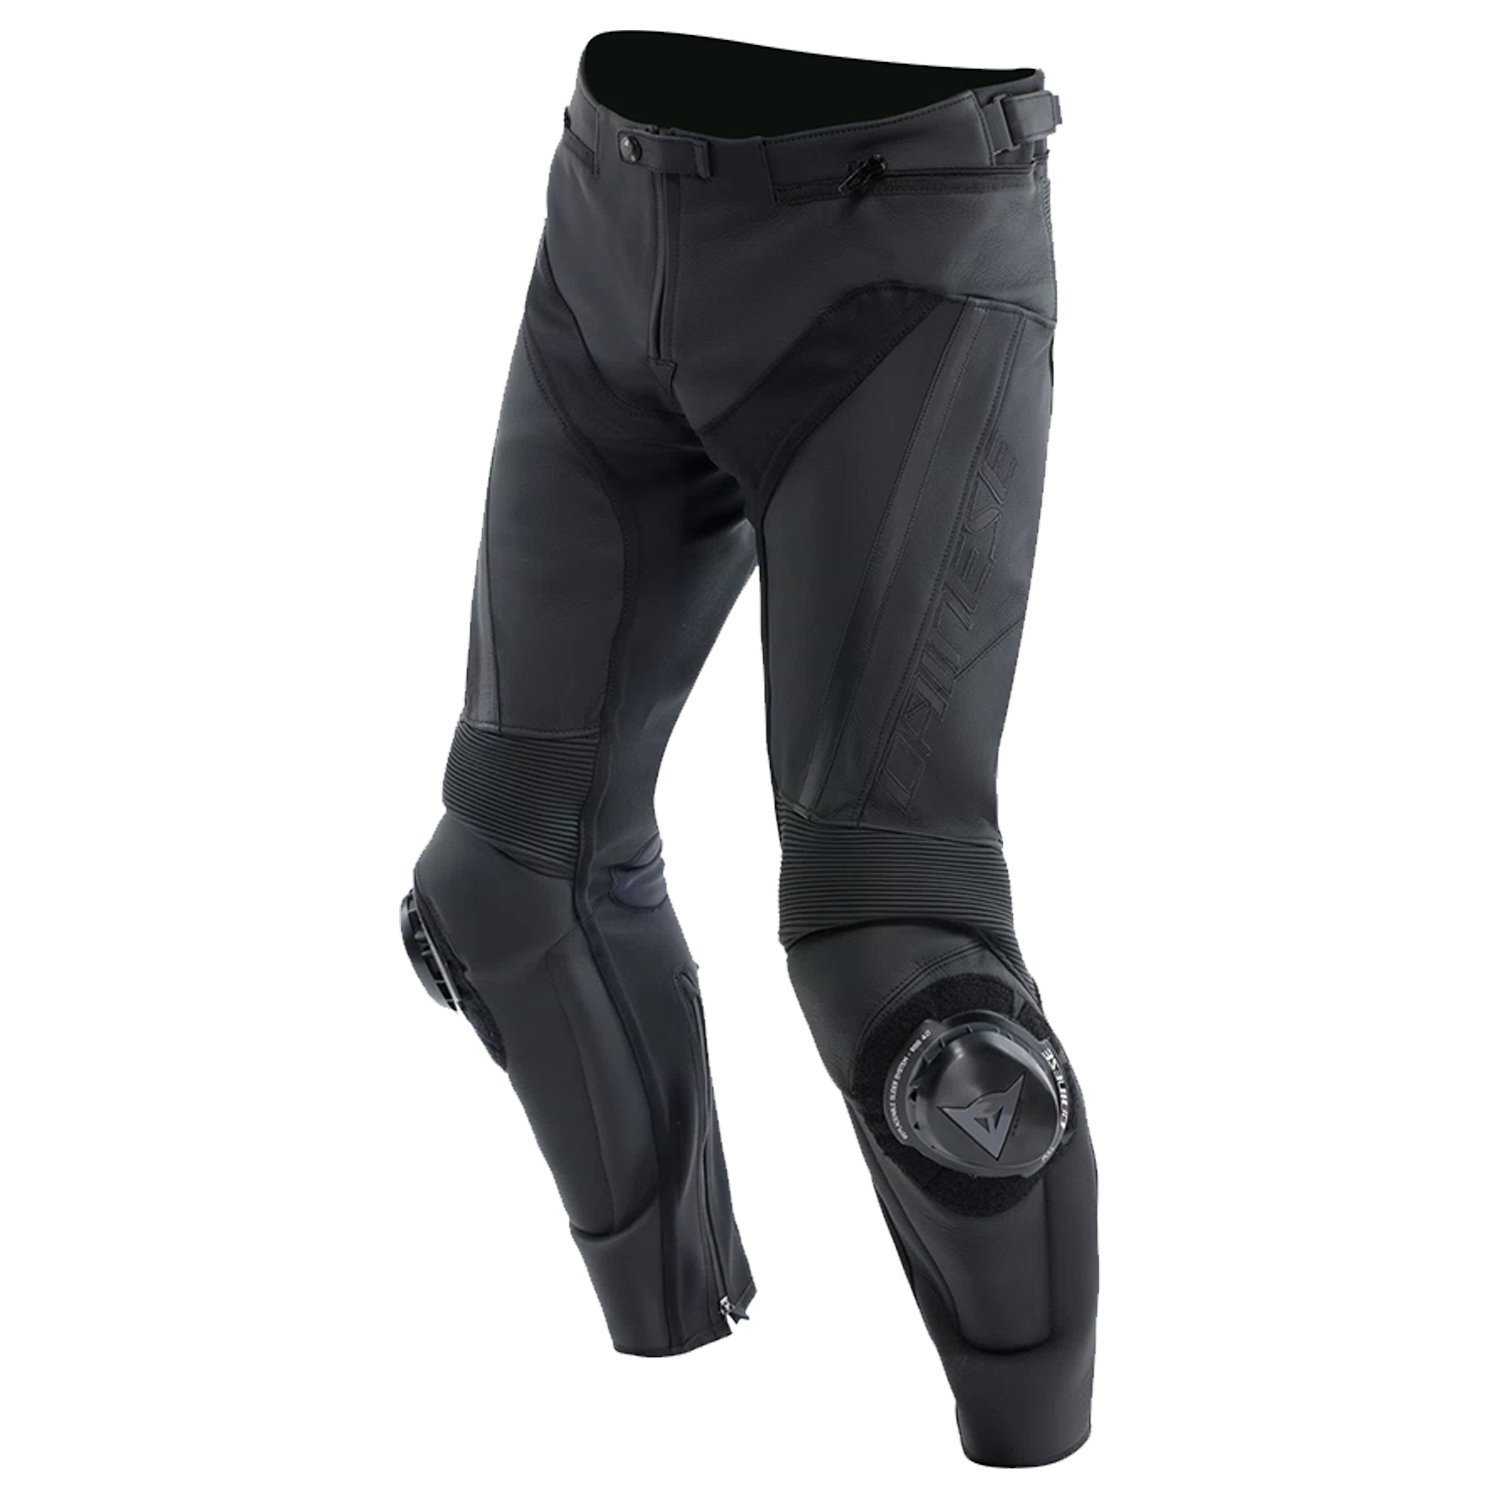 Image of Dainese Delta 4 Leather Pants Black Size 50 ID 8051019640239